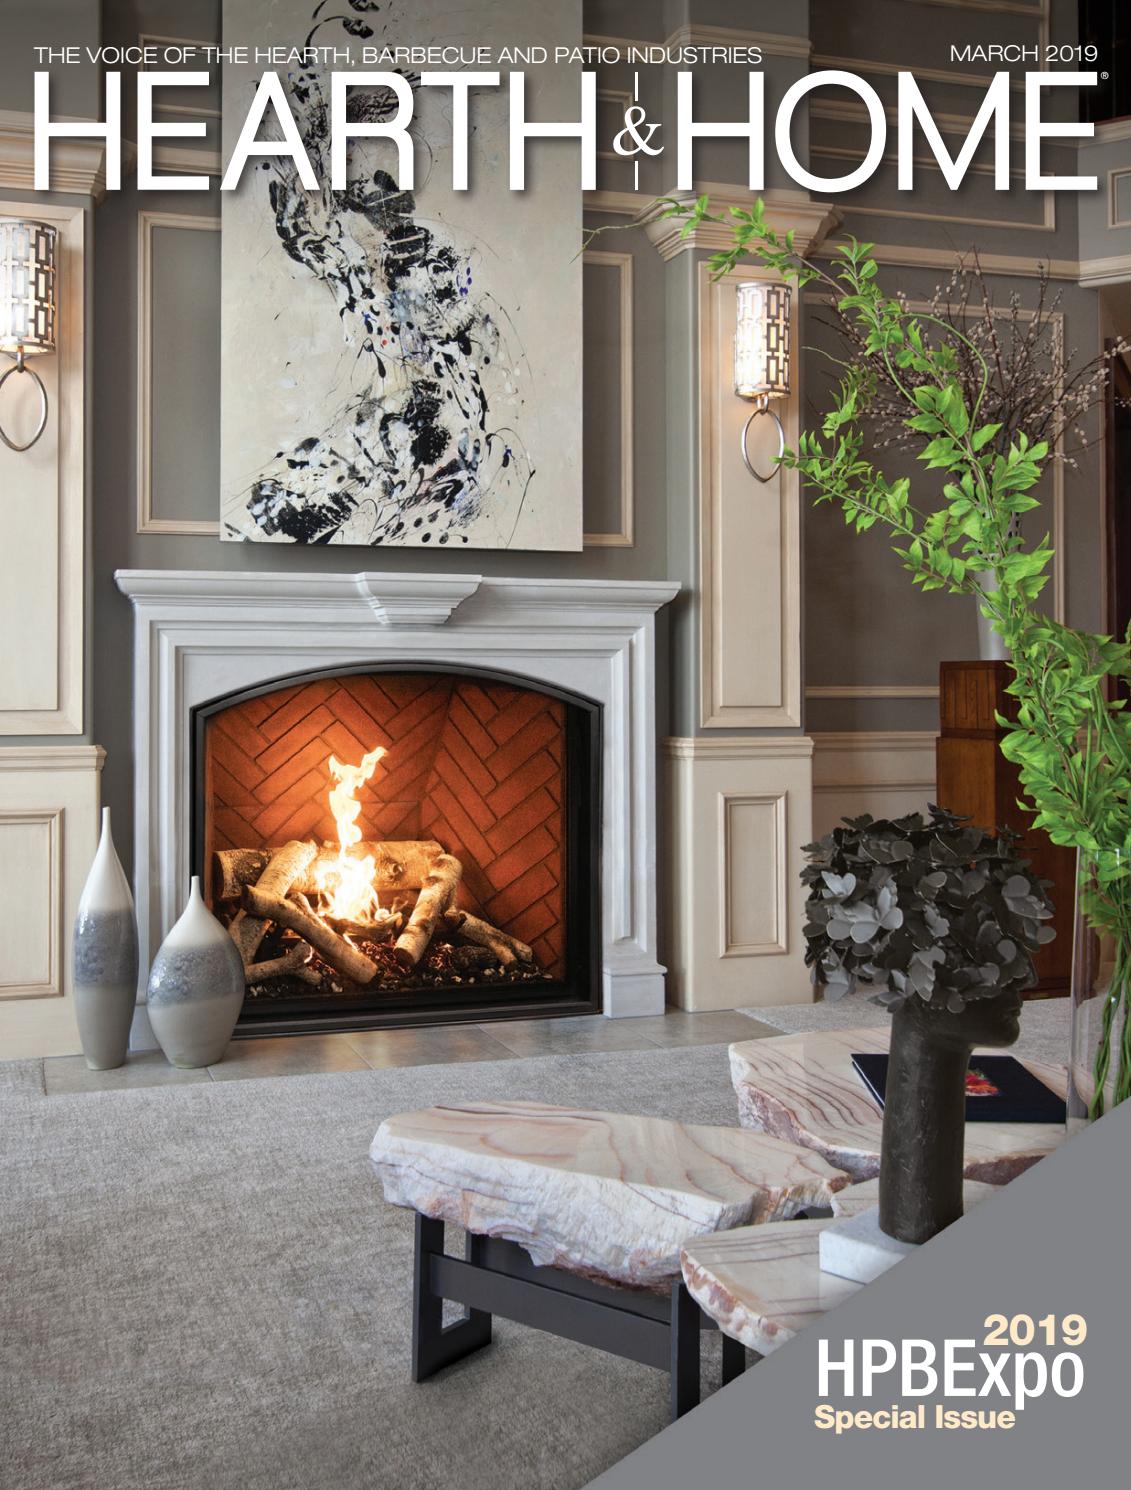 Fireplace Refractory Panel Replacement New Hearth & Home Magazine – 2019 March issue by Hearth & Home